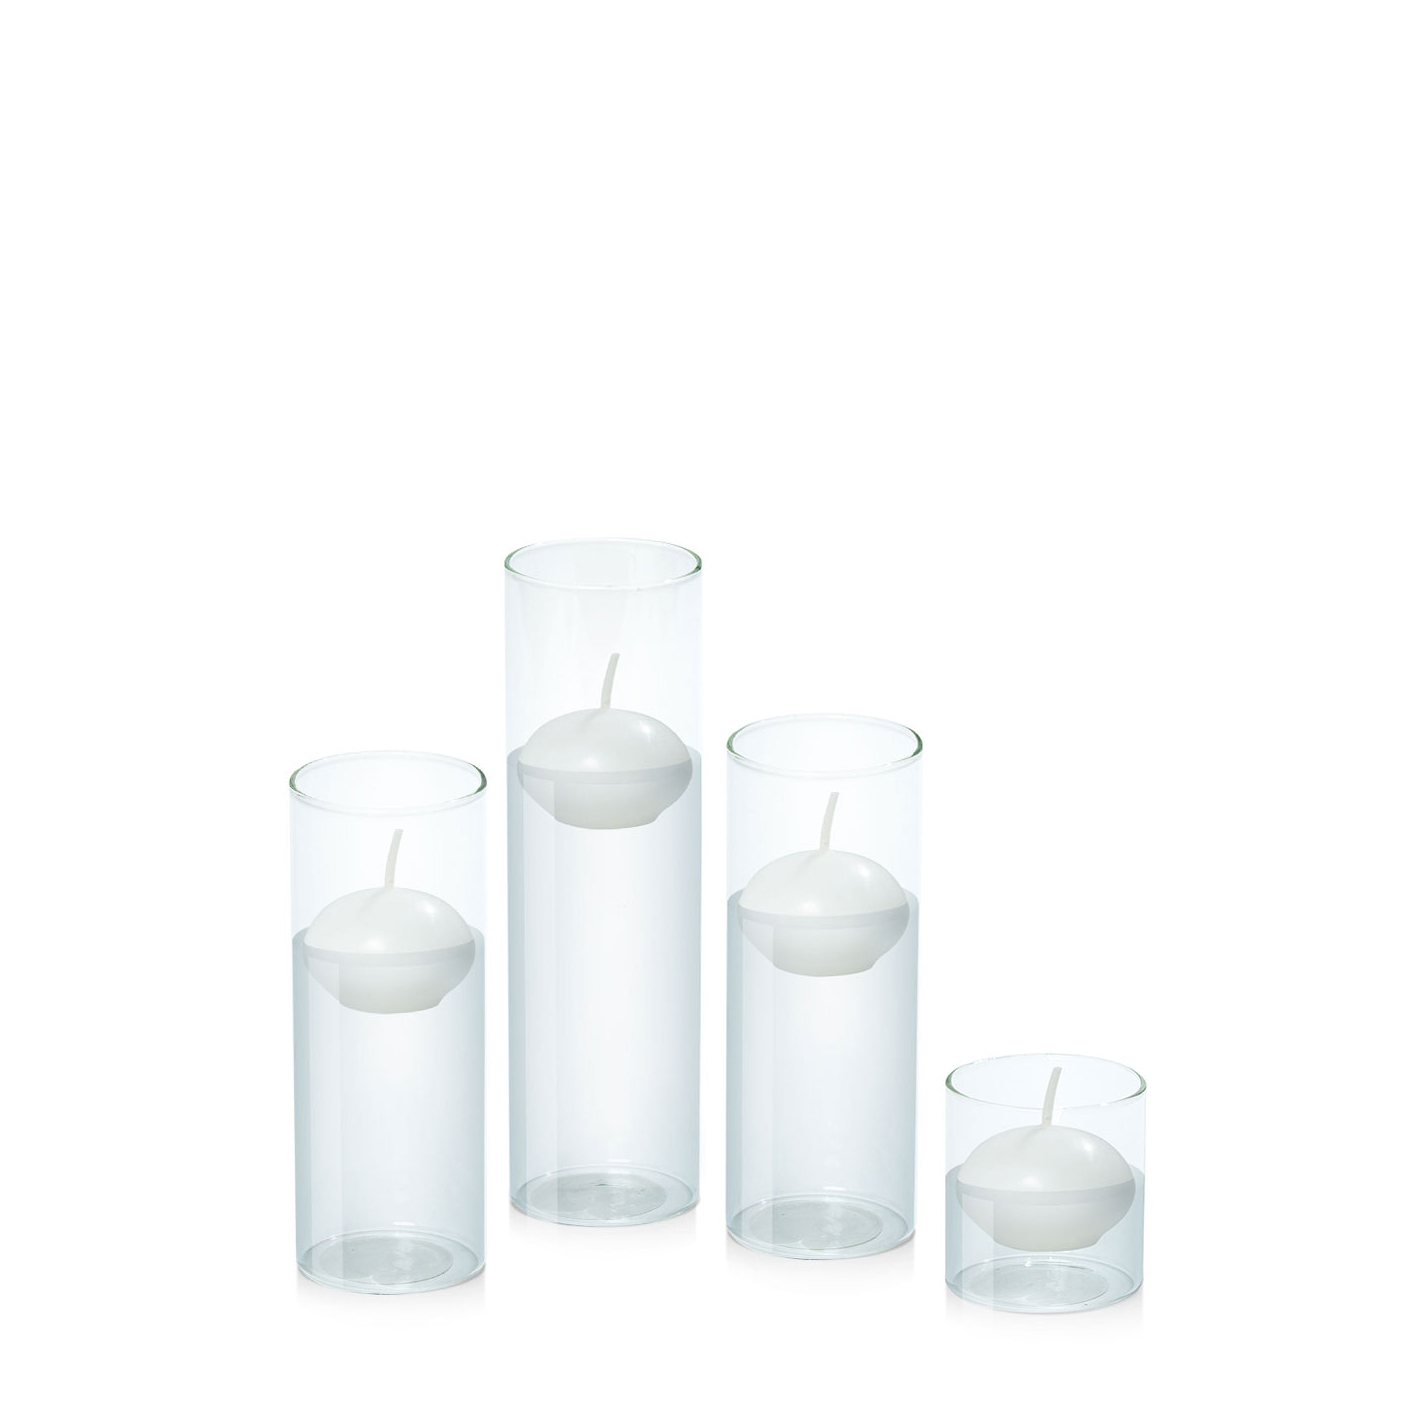 4cm Floating Candle in 5.8cm Glass Set - Sm